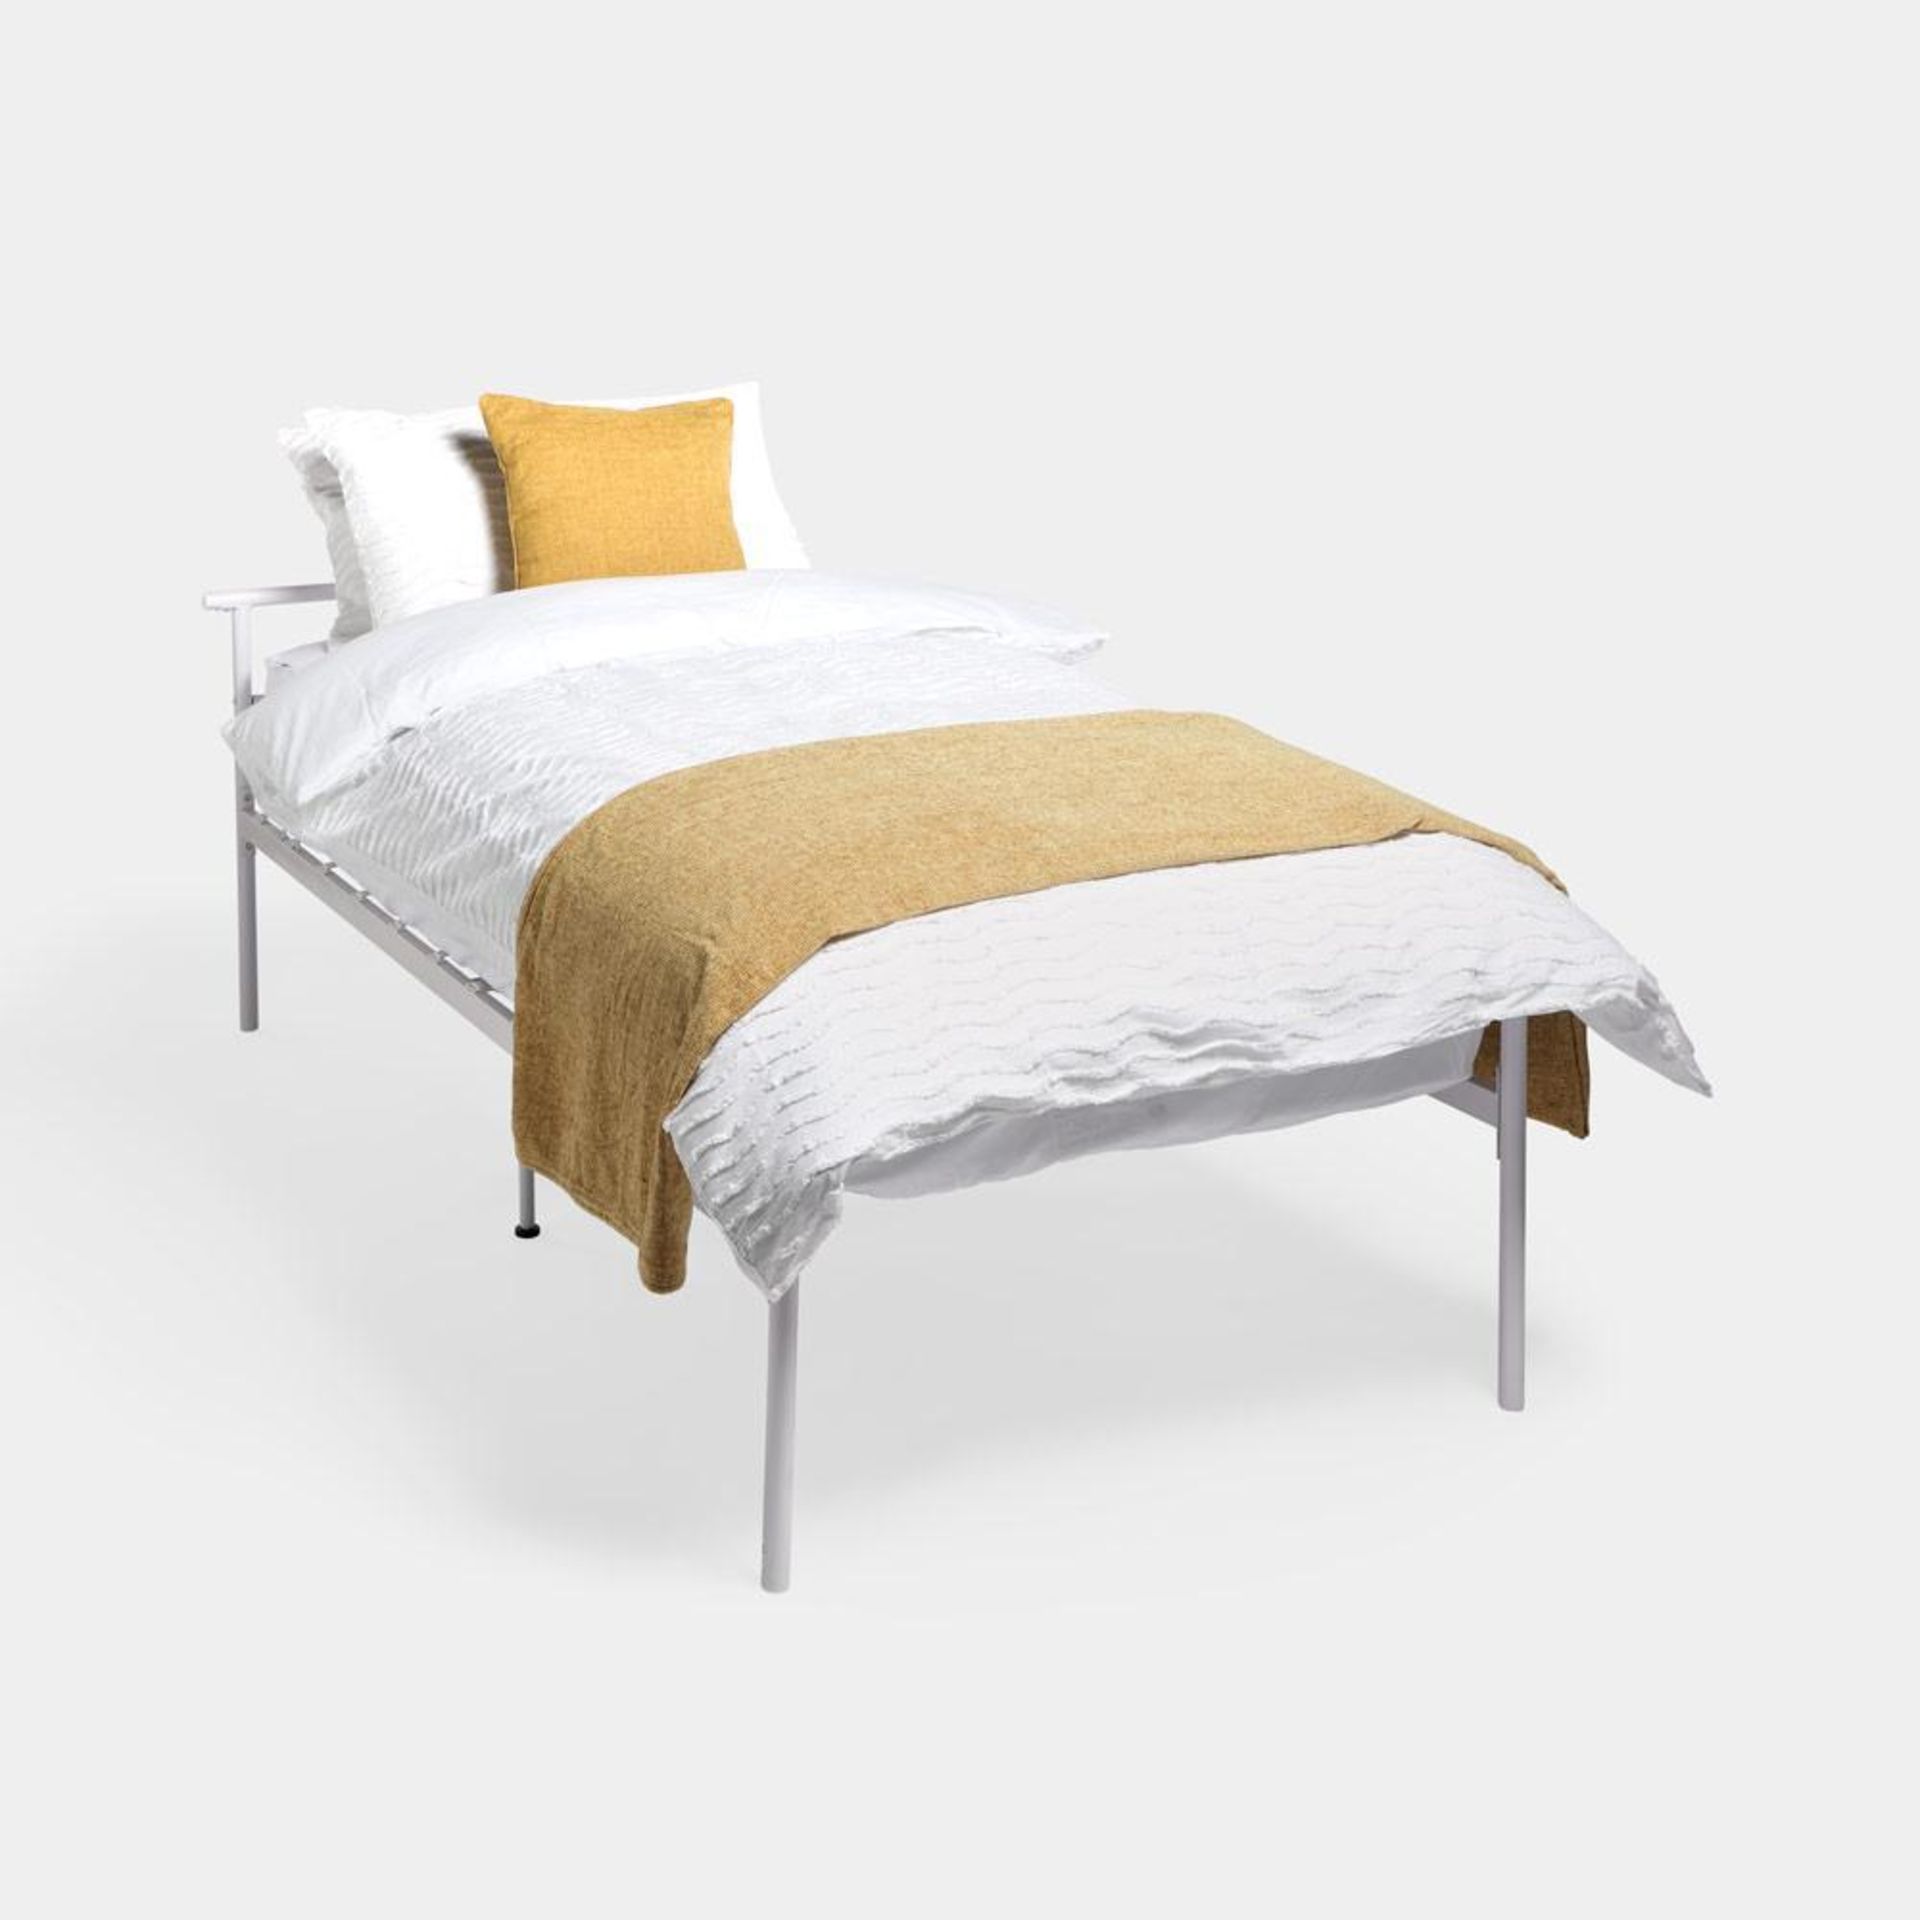 White Single Metal Bed Frame - BI. White Compact Single Metal BedWe spend a third of our lives